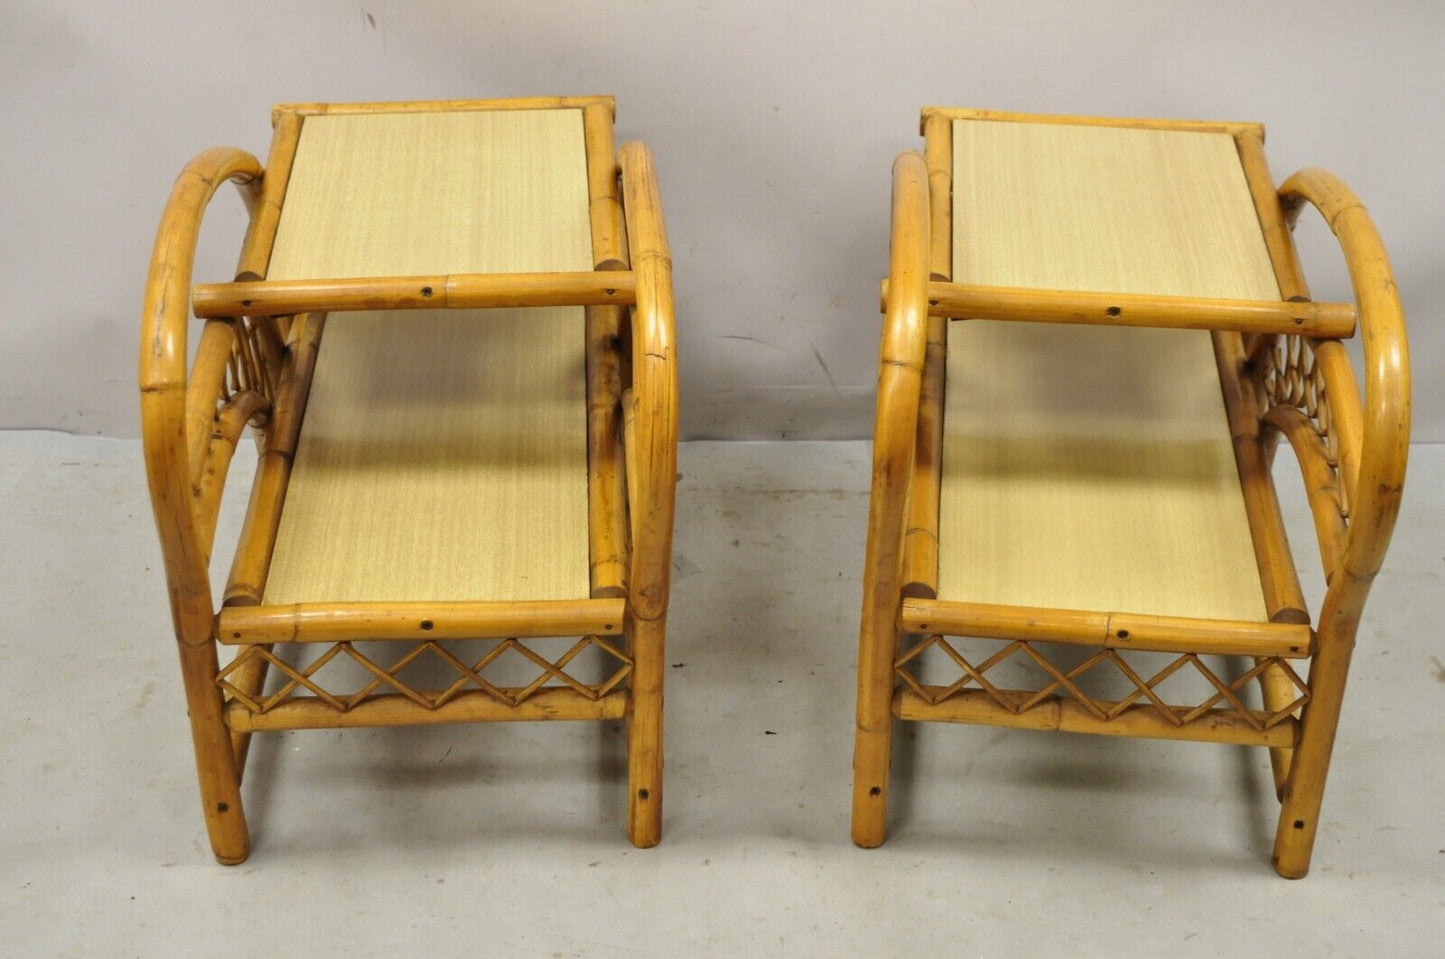 Vintage Tiki Rattan Bentwood Bamboo 2 Tier Sculptural End Tables - a Pair